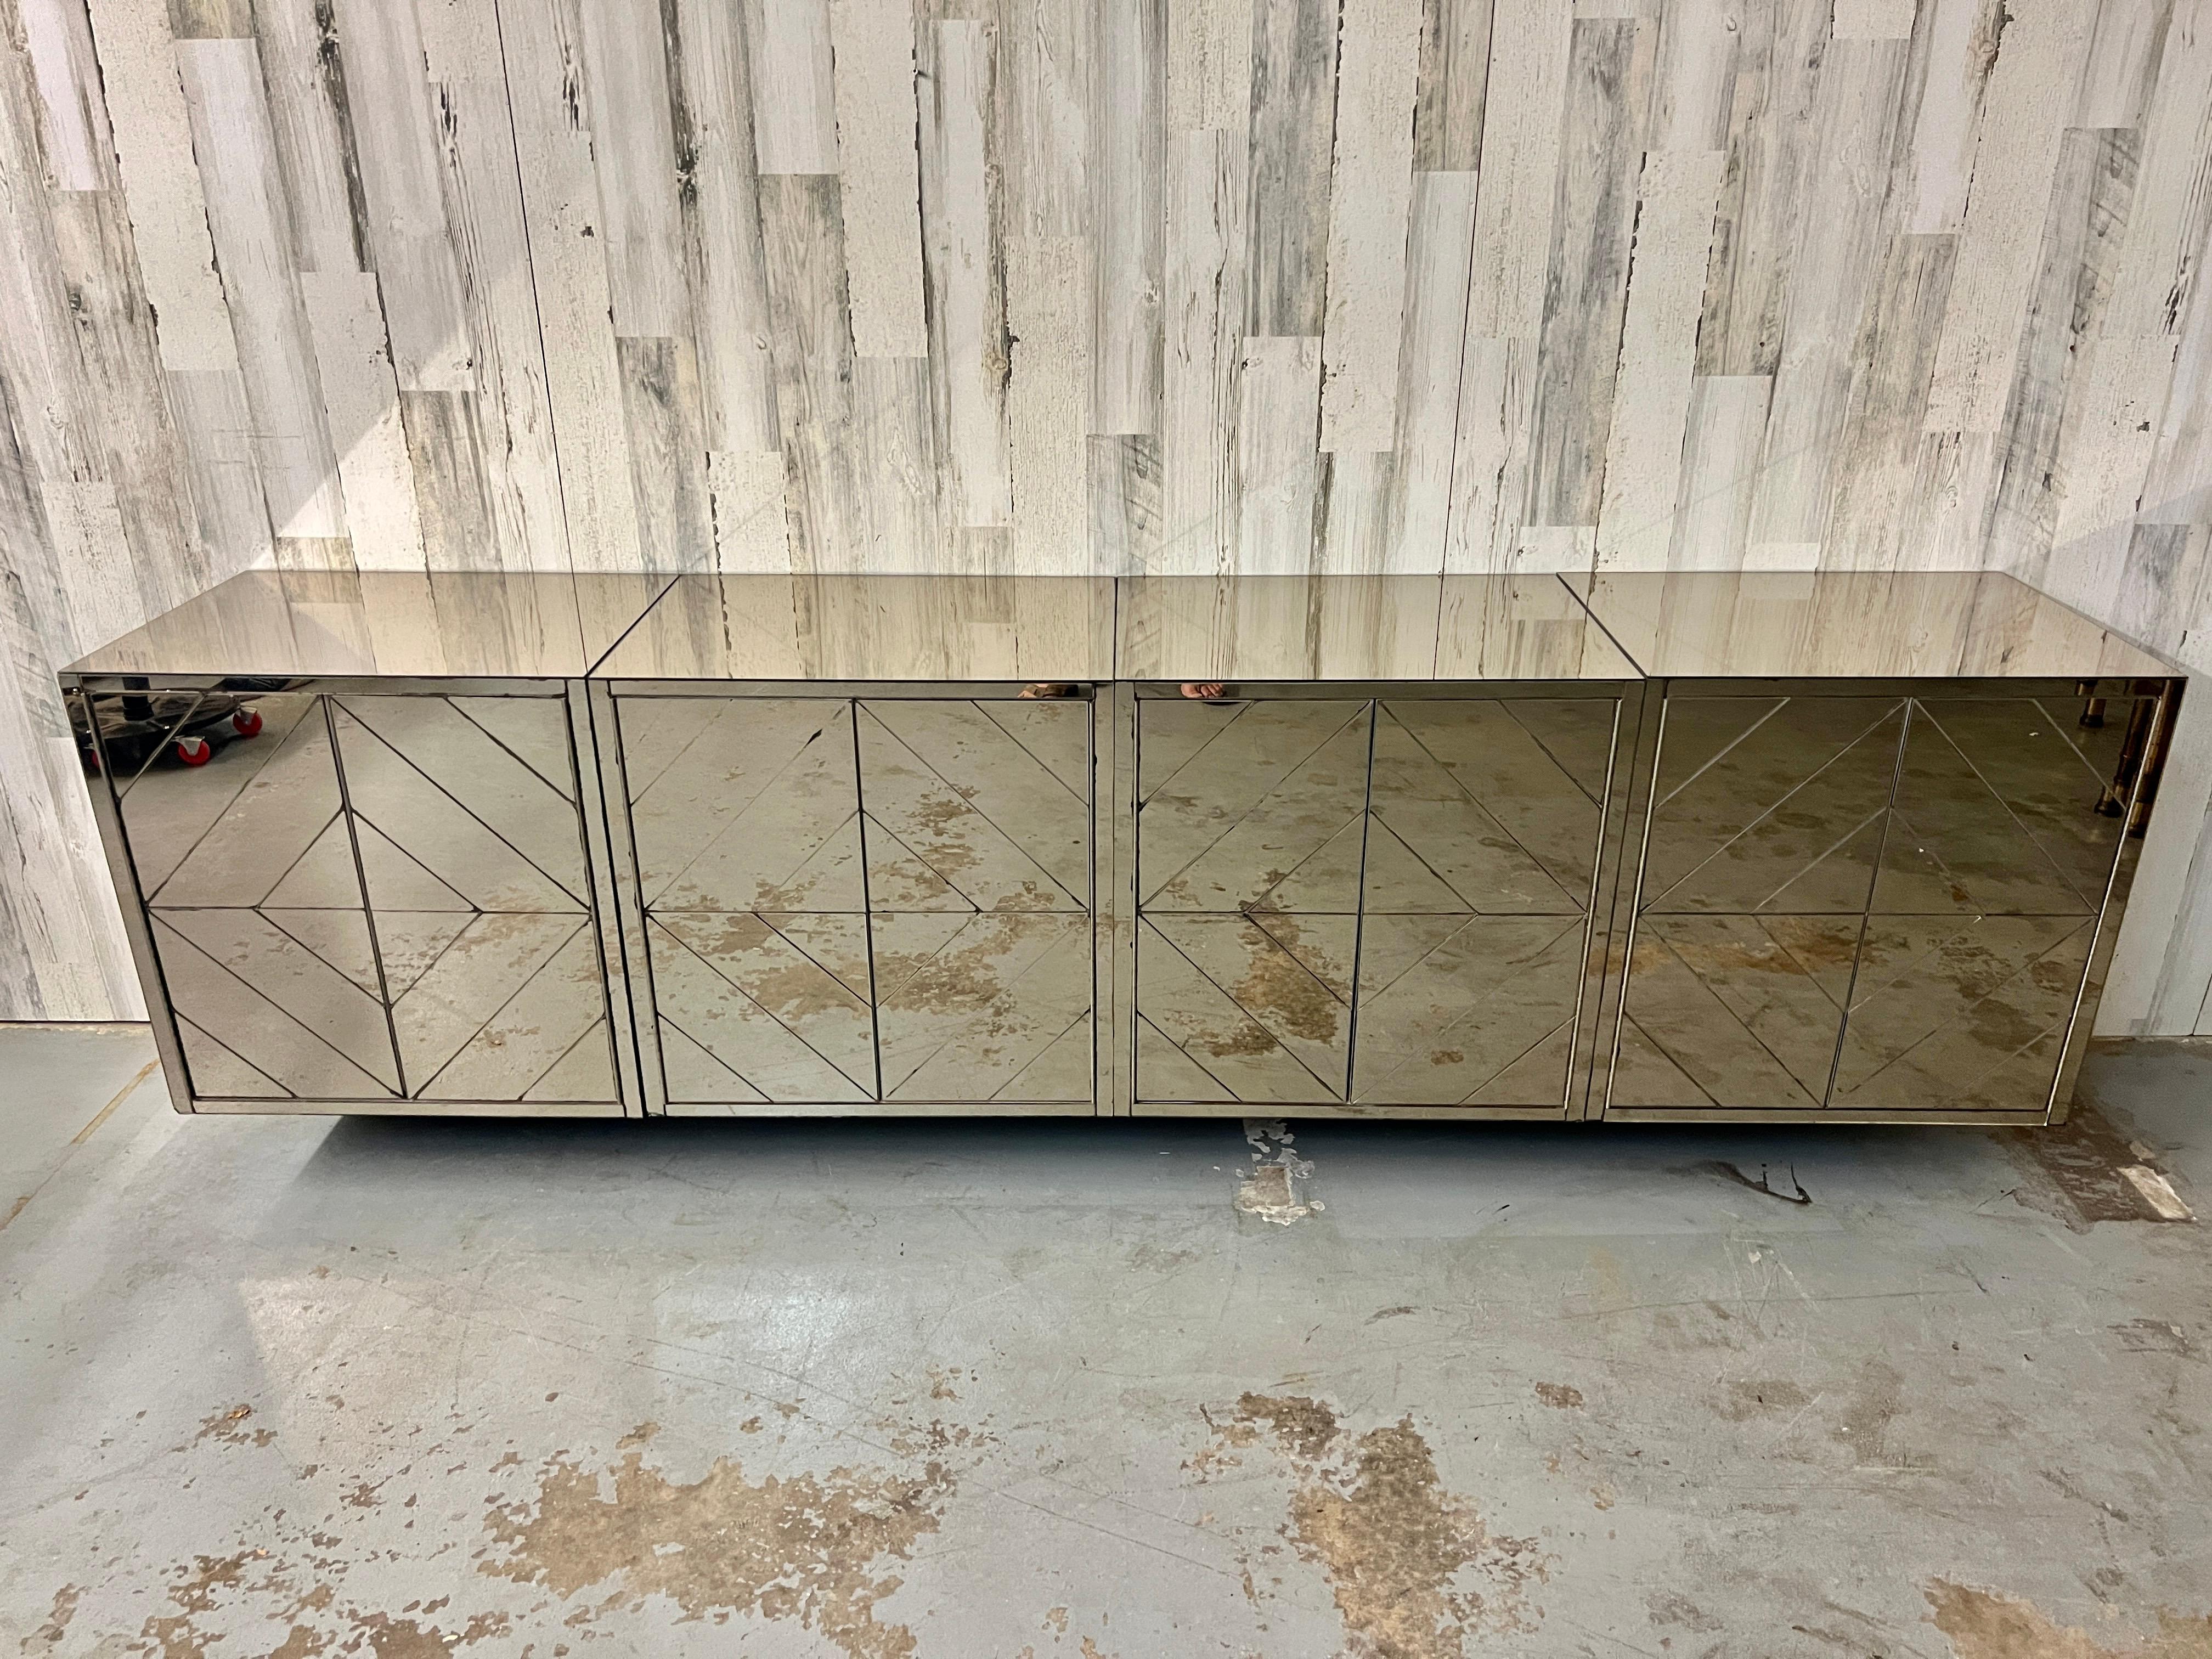 Giant Mirrored Diamond pattern floating credenza. These pieces can be hung together or separated into any configuration. They can also be hung at any hight making them very versatile for any space. This fully mirrored credenza has a very 1970s look.